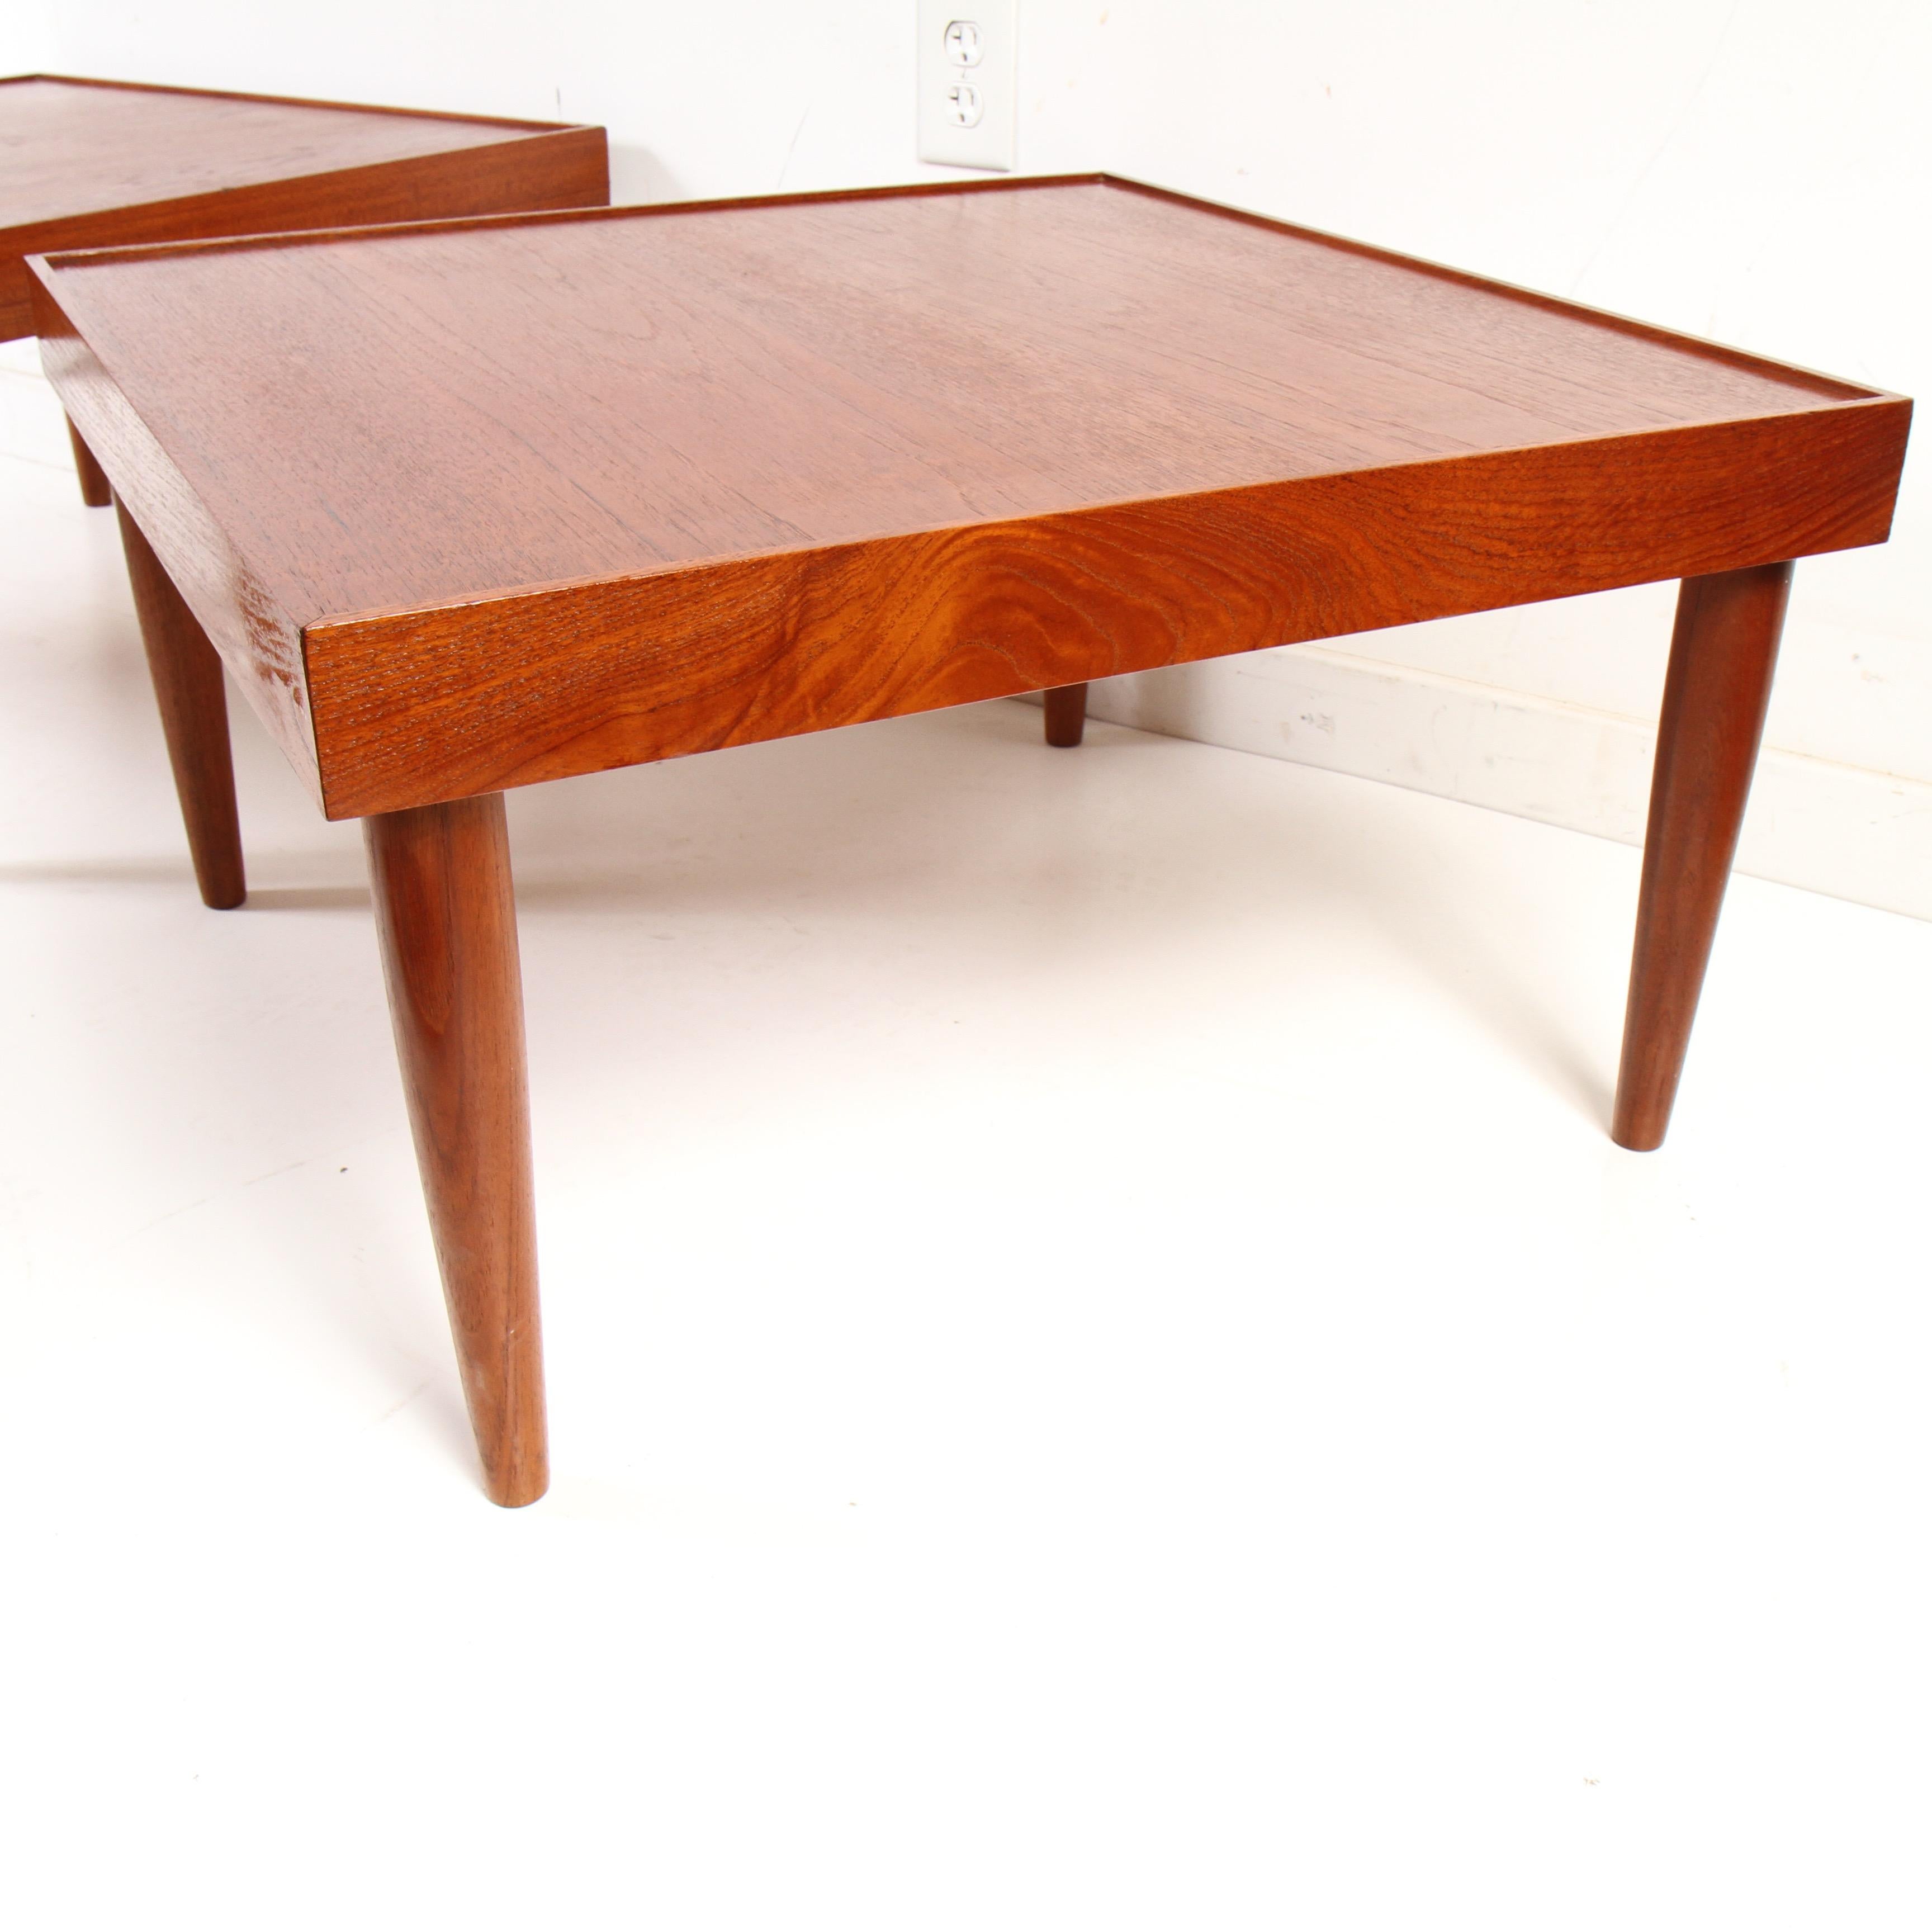 Midcentury Teak End Tables from Norway In Good Condition For Sale In New London, CT